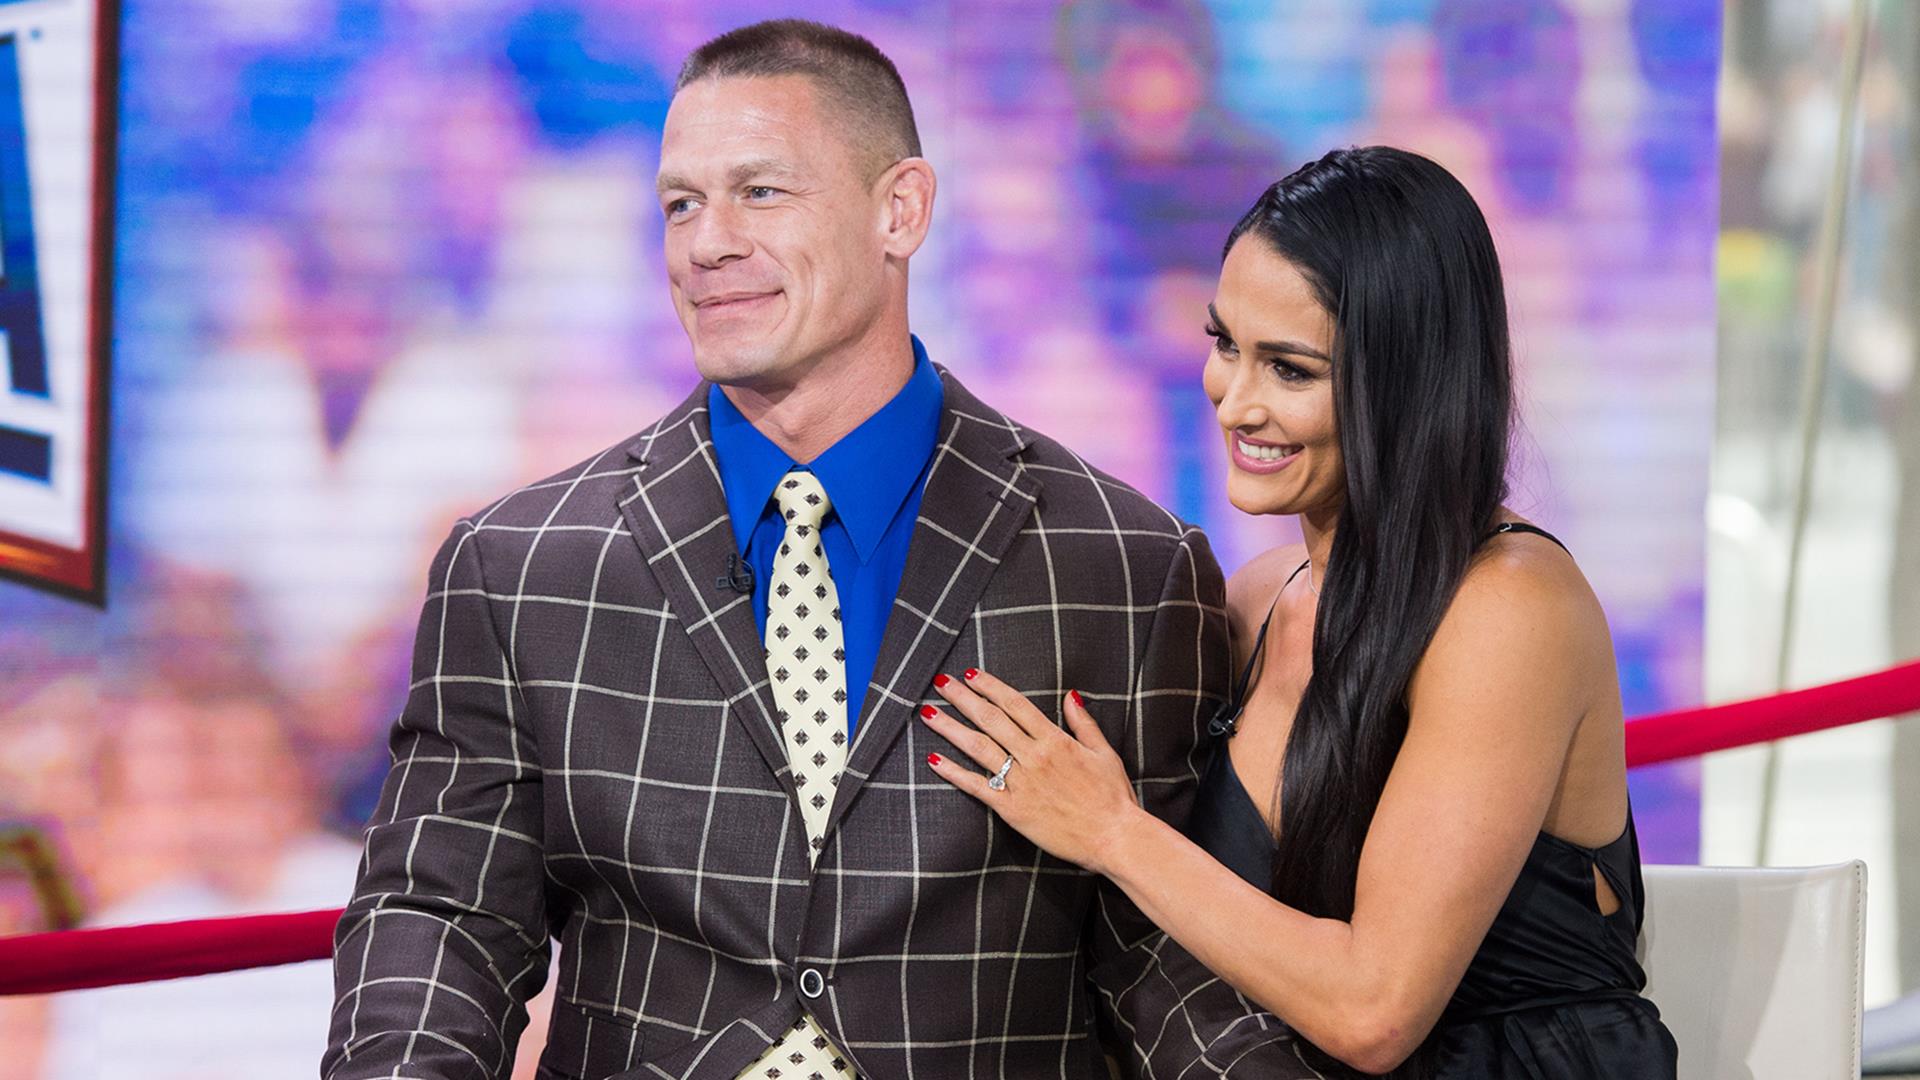 John Cena gives update on relationship with Nikki Bella: 'We're working through'